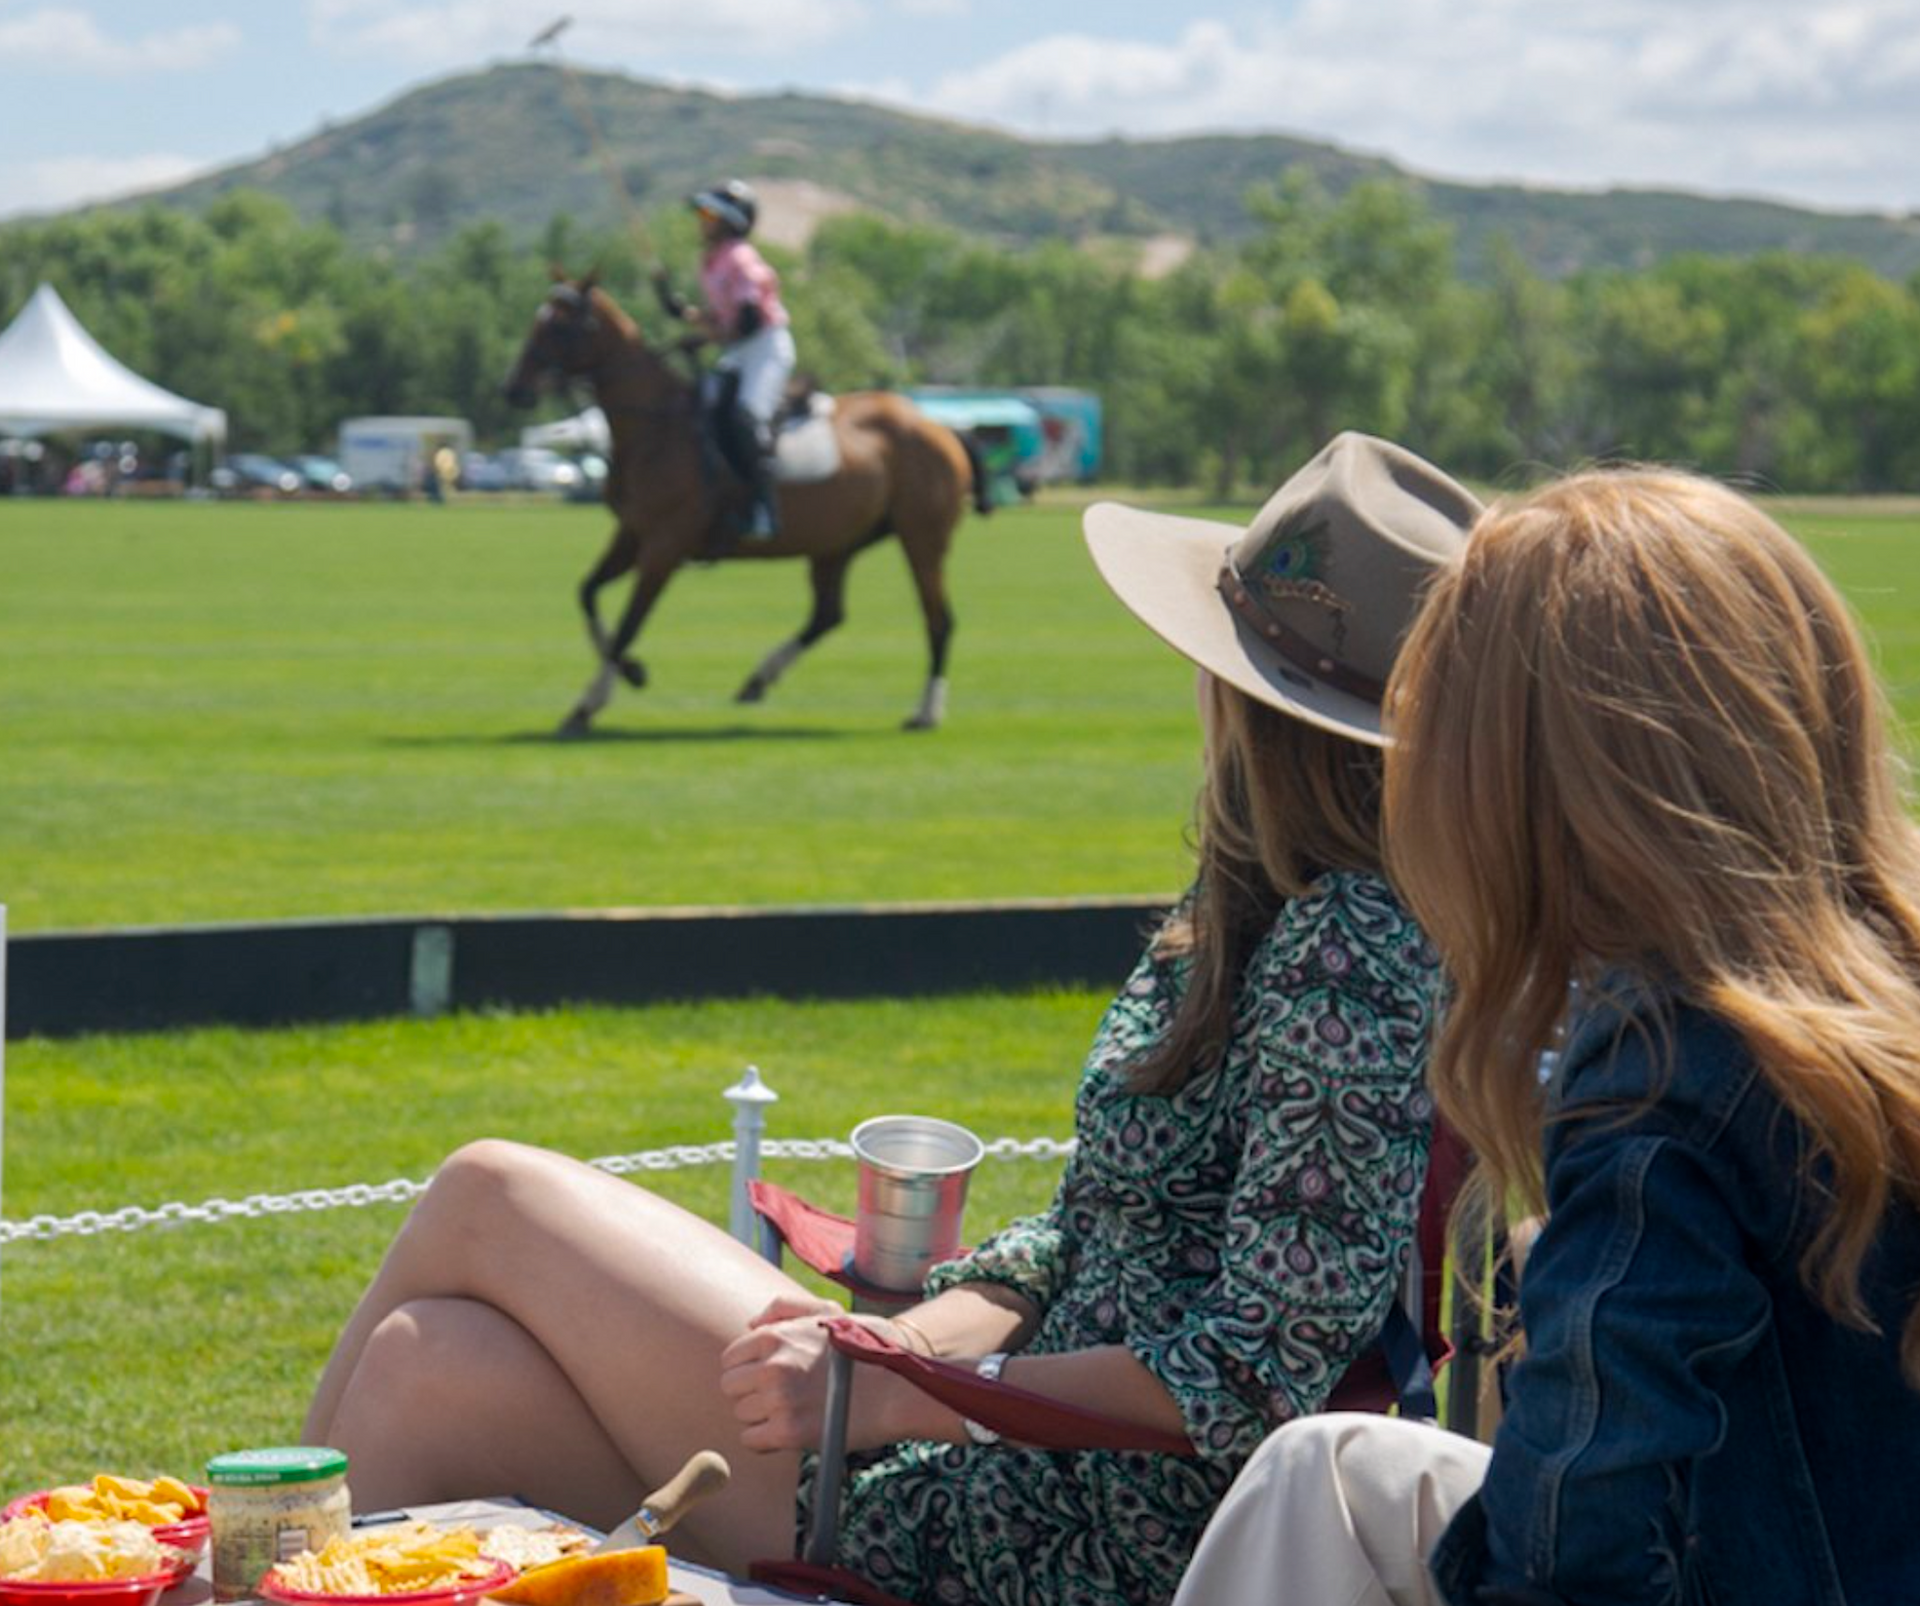 Two women sitting on the grass watching a horse race